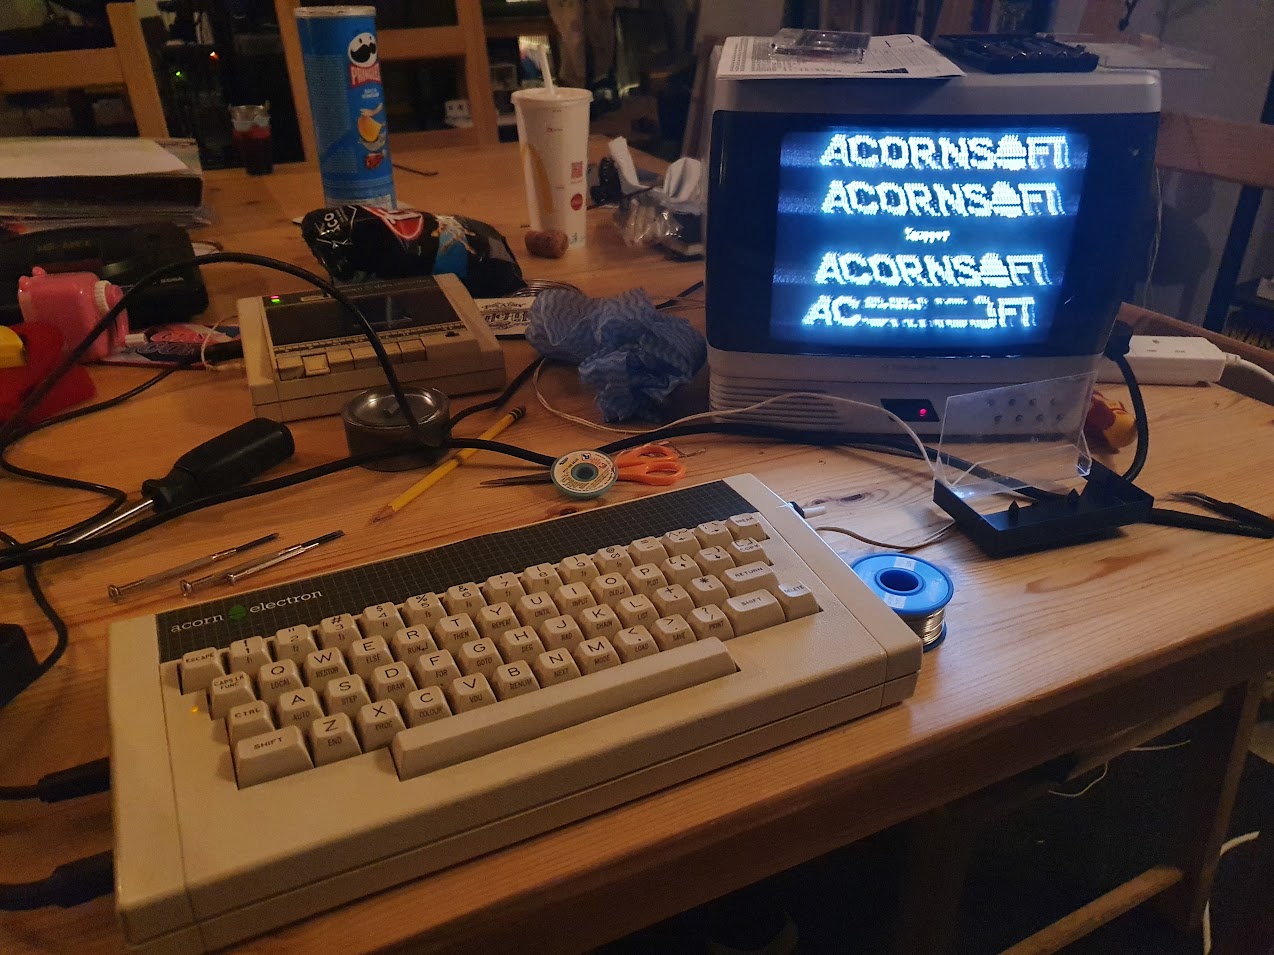 A small portable tv hooked up to an acorn electron